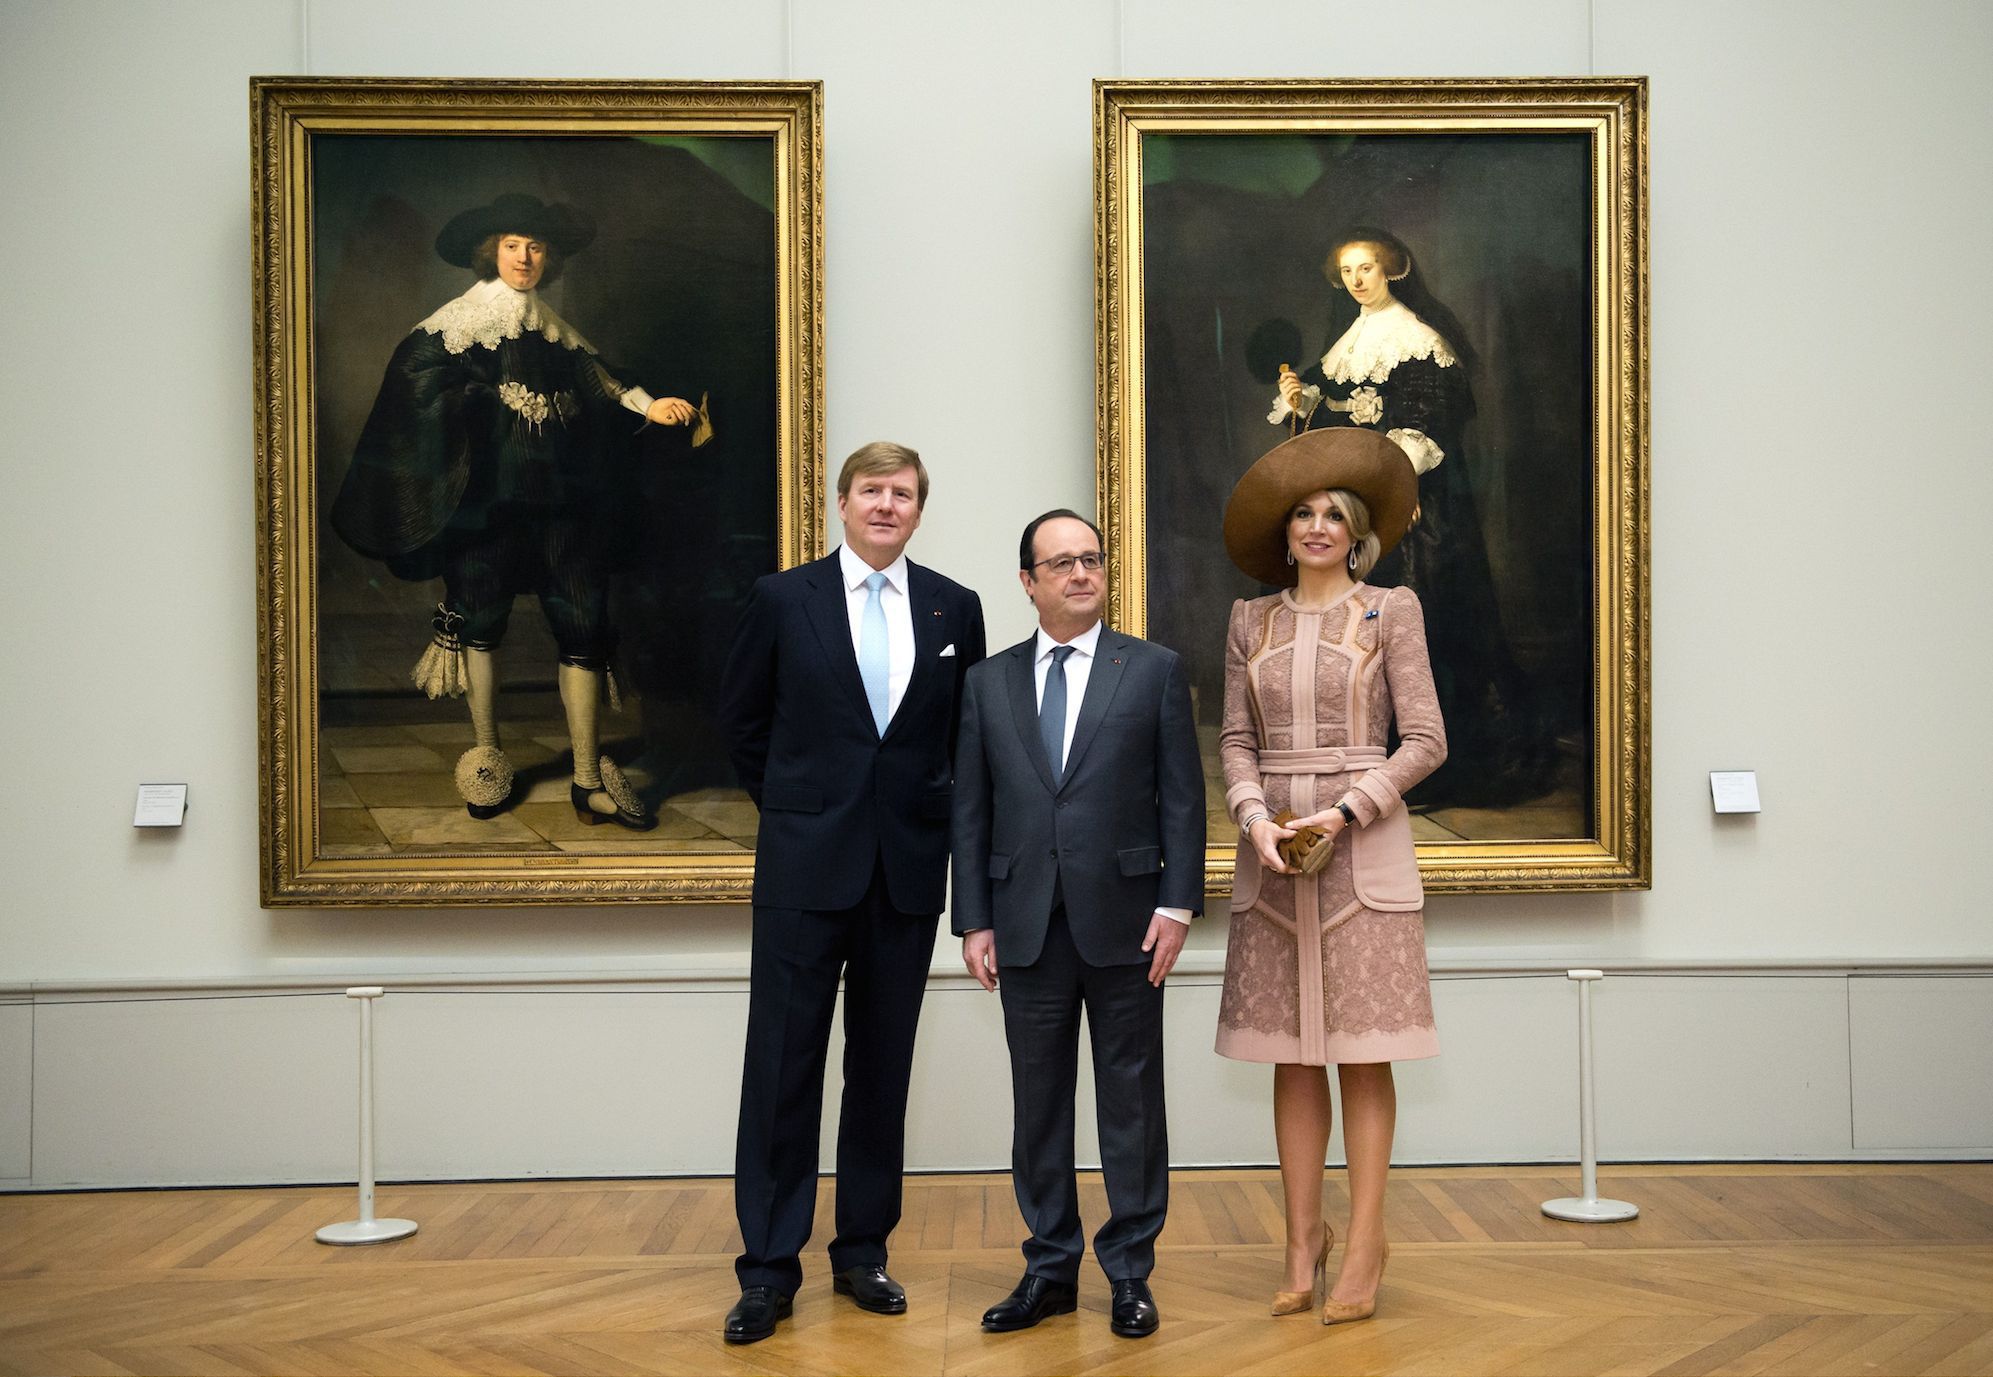 King-Willem-Alexander-of-the-Netherlands-President-Francois-Hollande-of-France-and-Queen-Maxima-of-the-Netherlands-in-front-the-Rembrandt-portraits-at-the-Louvre-Museum-March-10-2016.-Etienne-Laure.jpg